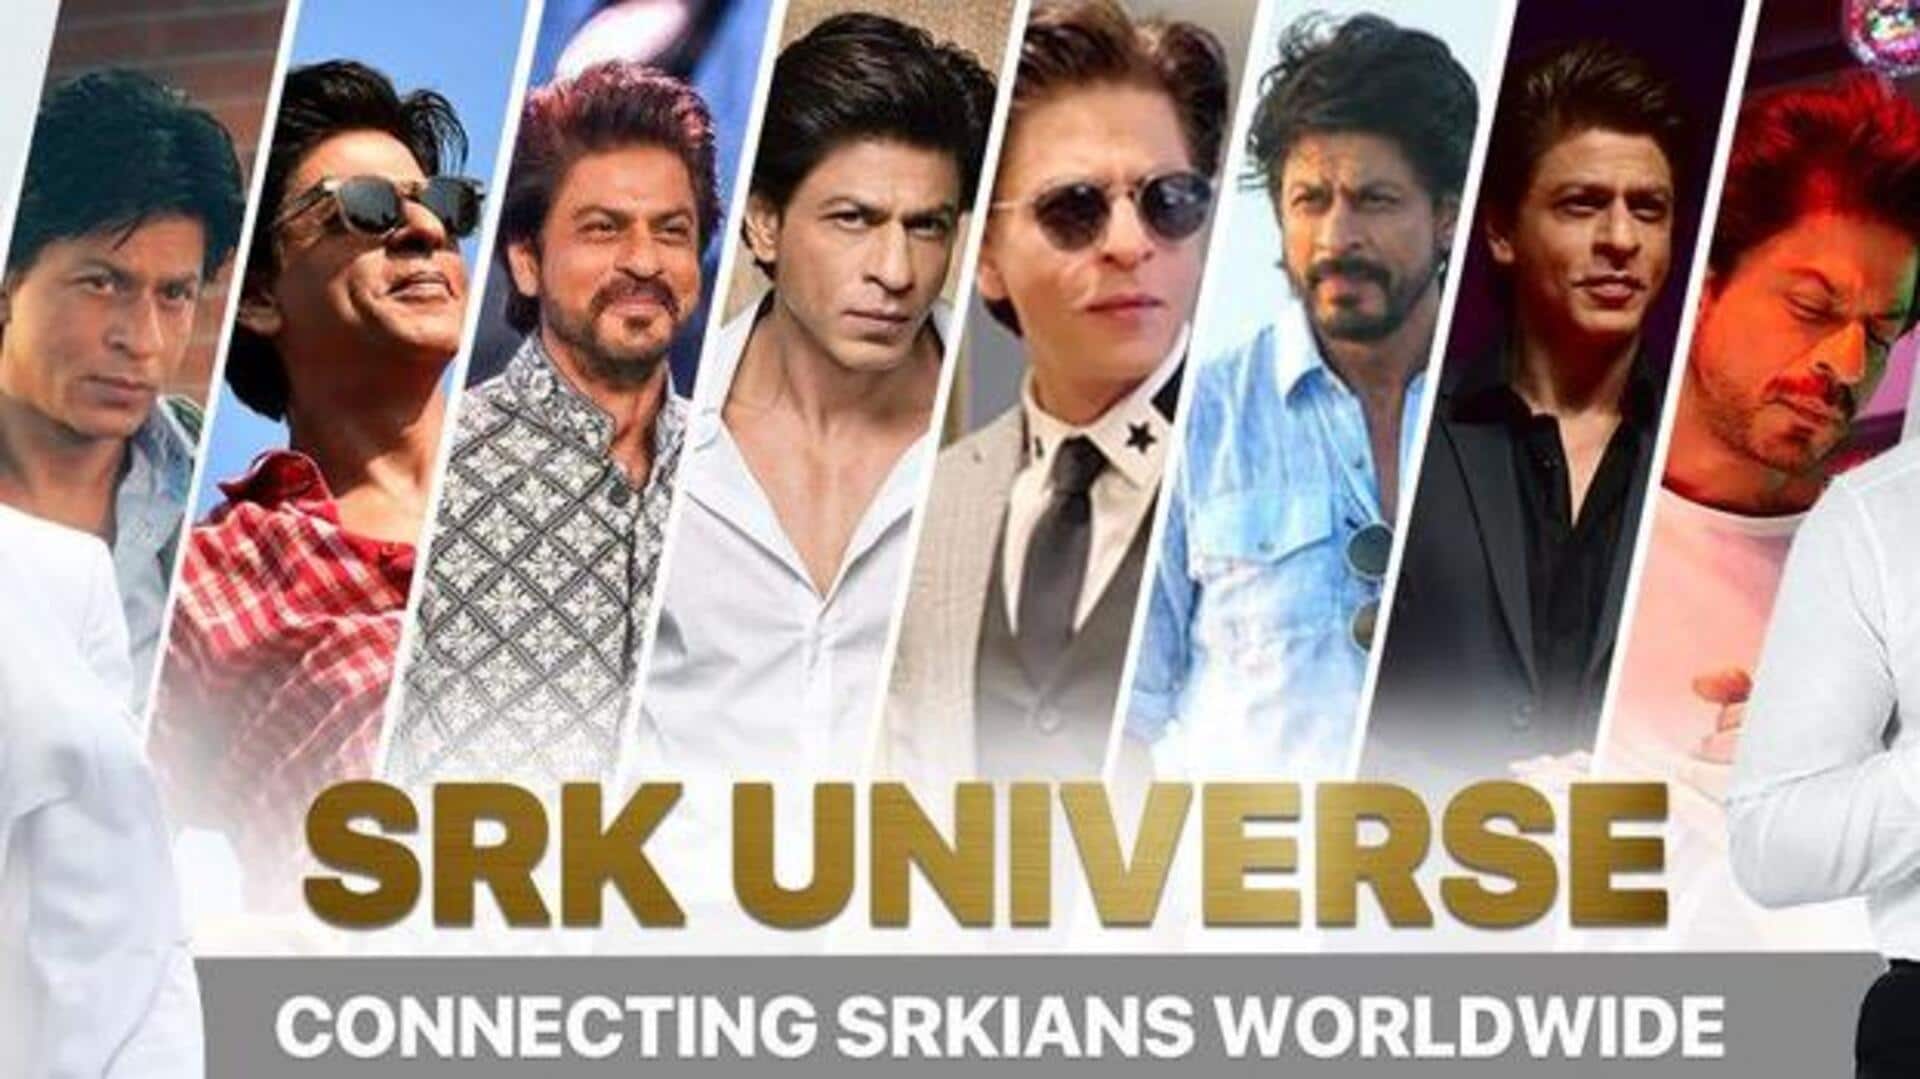 SRK Universe dissociates from news portal over 'unethical' practices